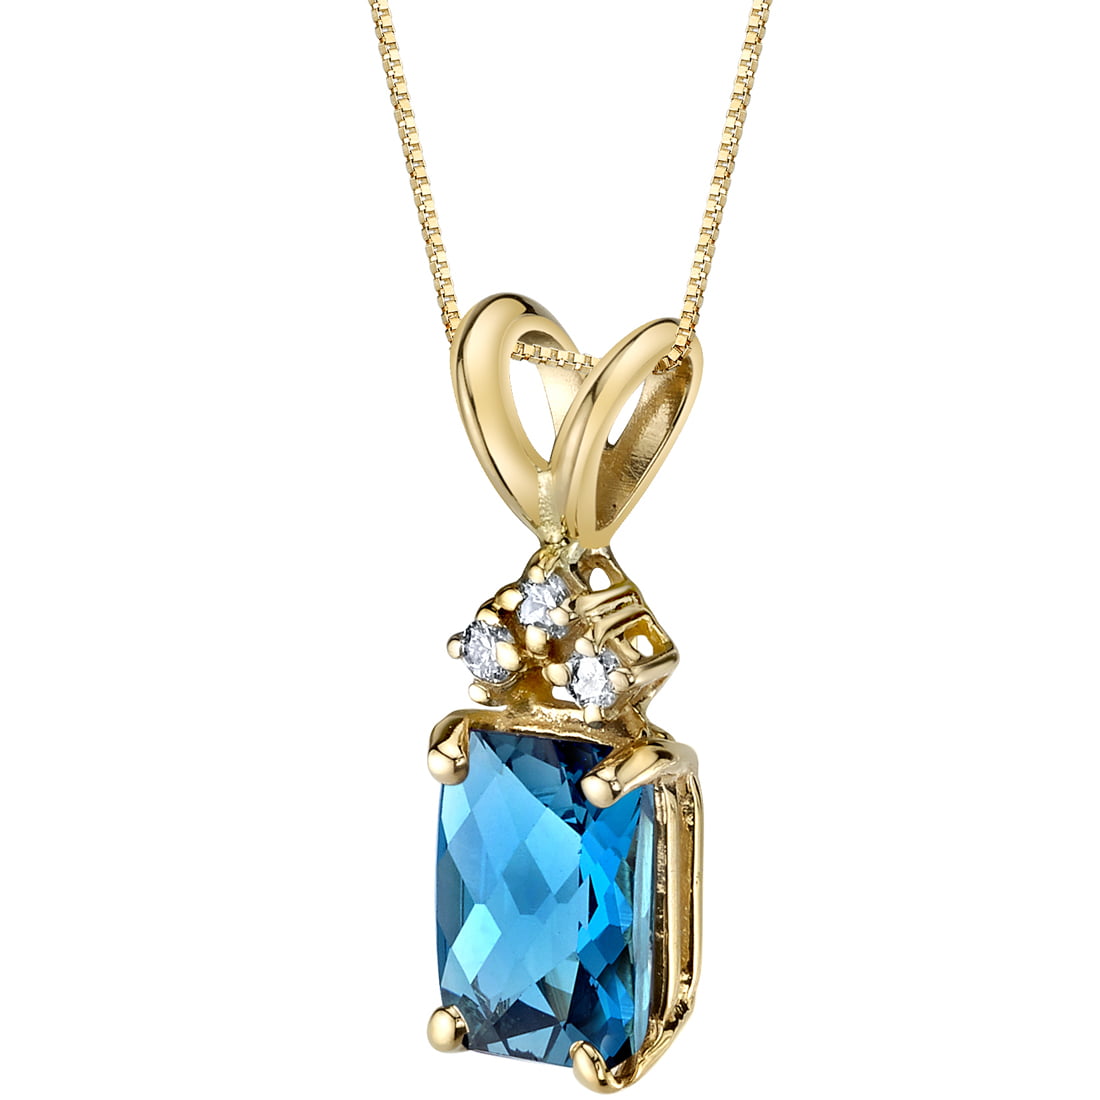 2.5ct London Blue Topaz Sterling .925 Silver Pendant w/ 18" Chain Necklace 